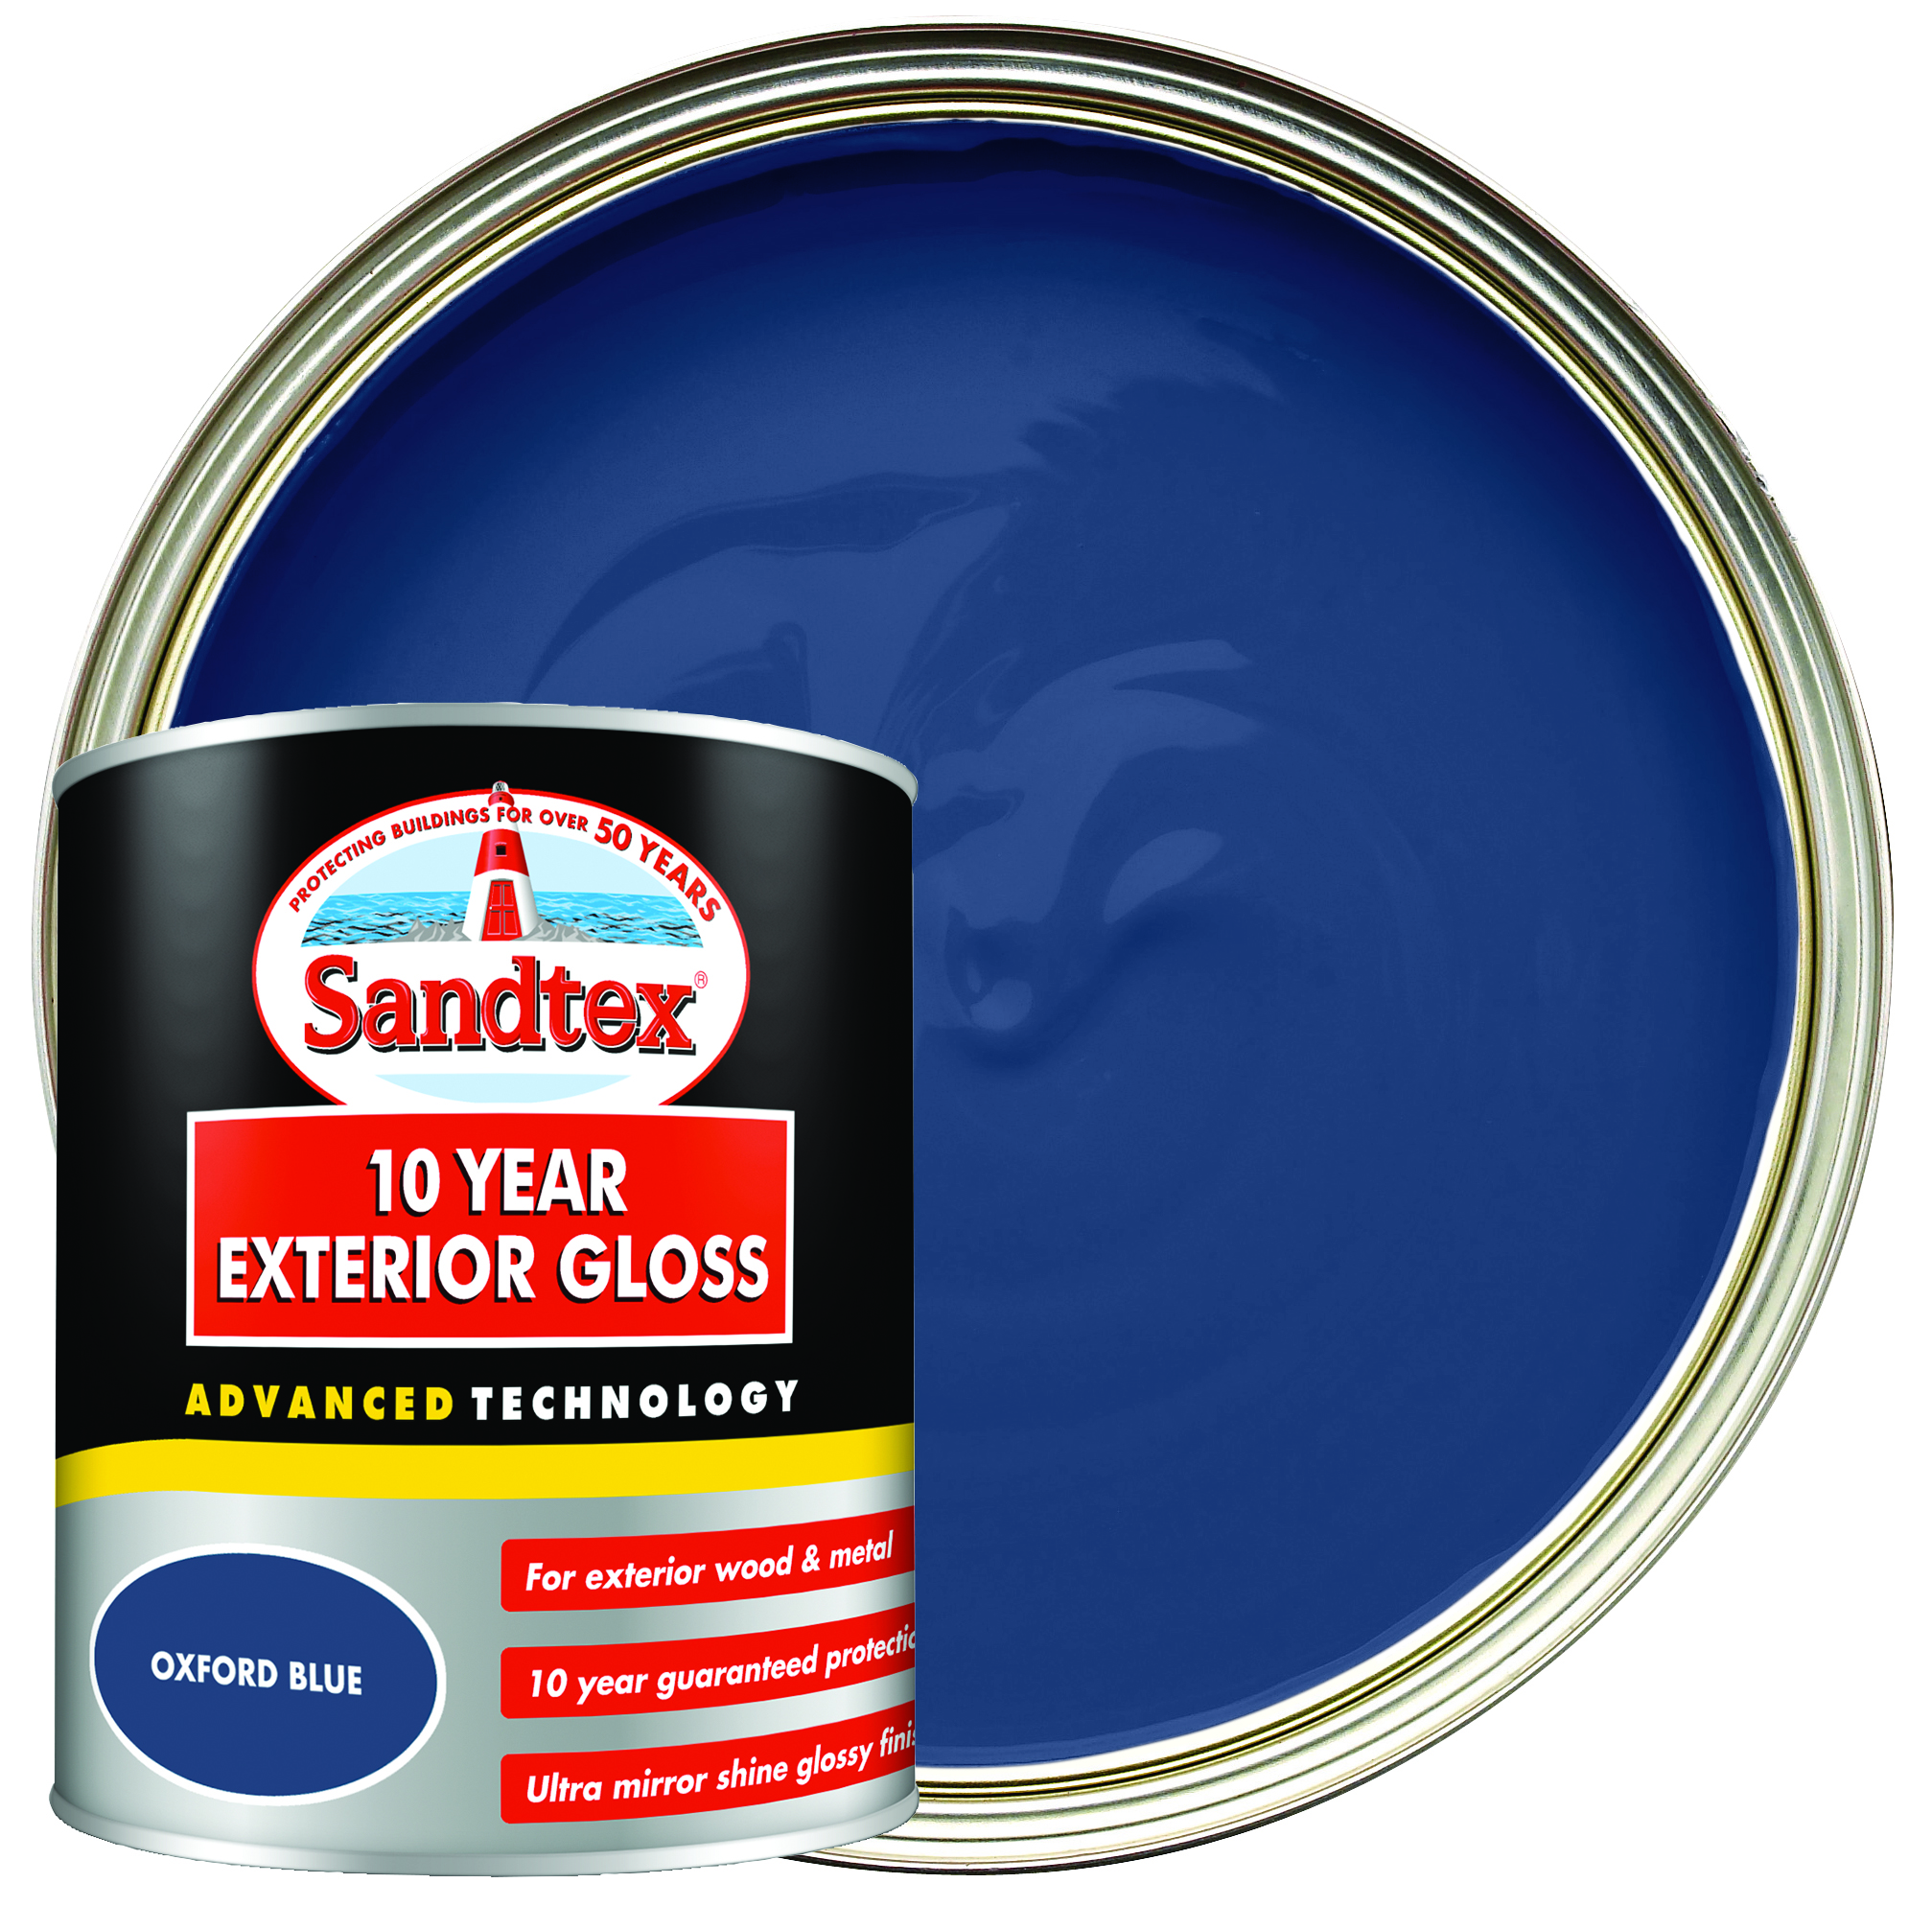 Image of Sandtex 10 Year Exterior Gloss Paint - Oxford Blue - 750ml